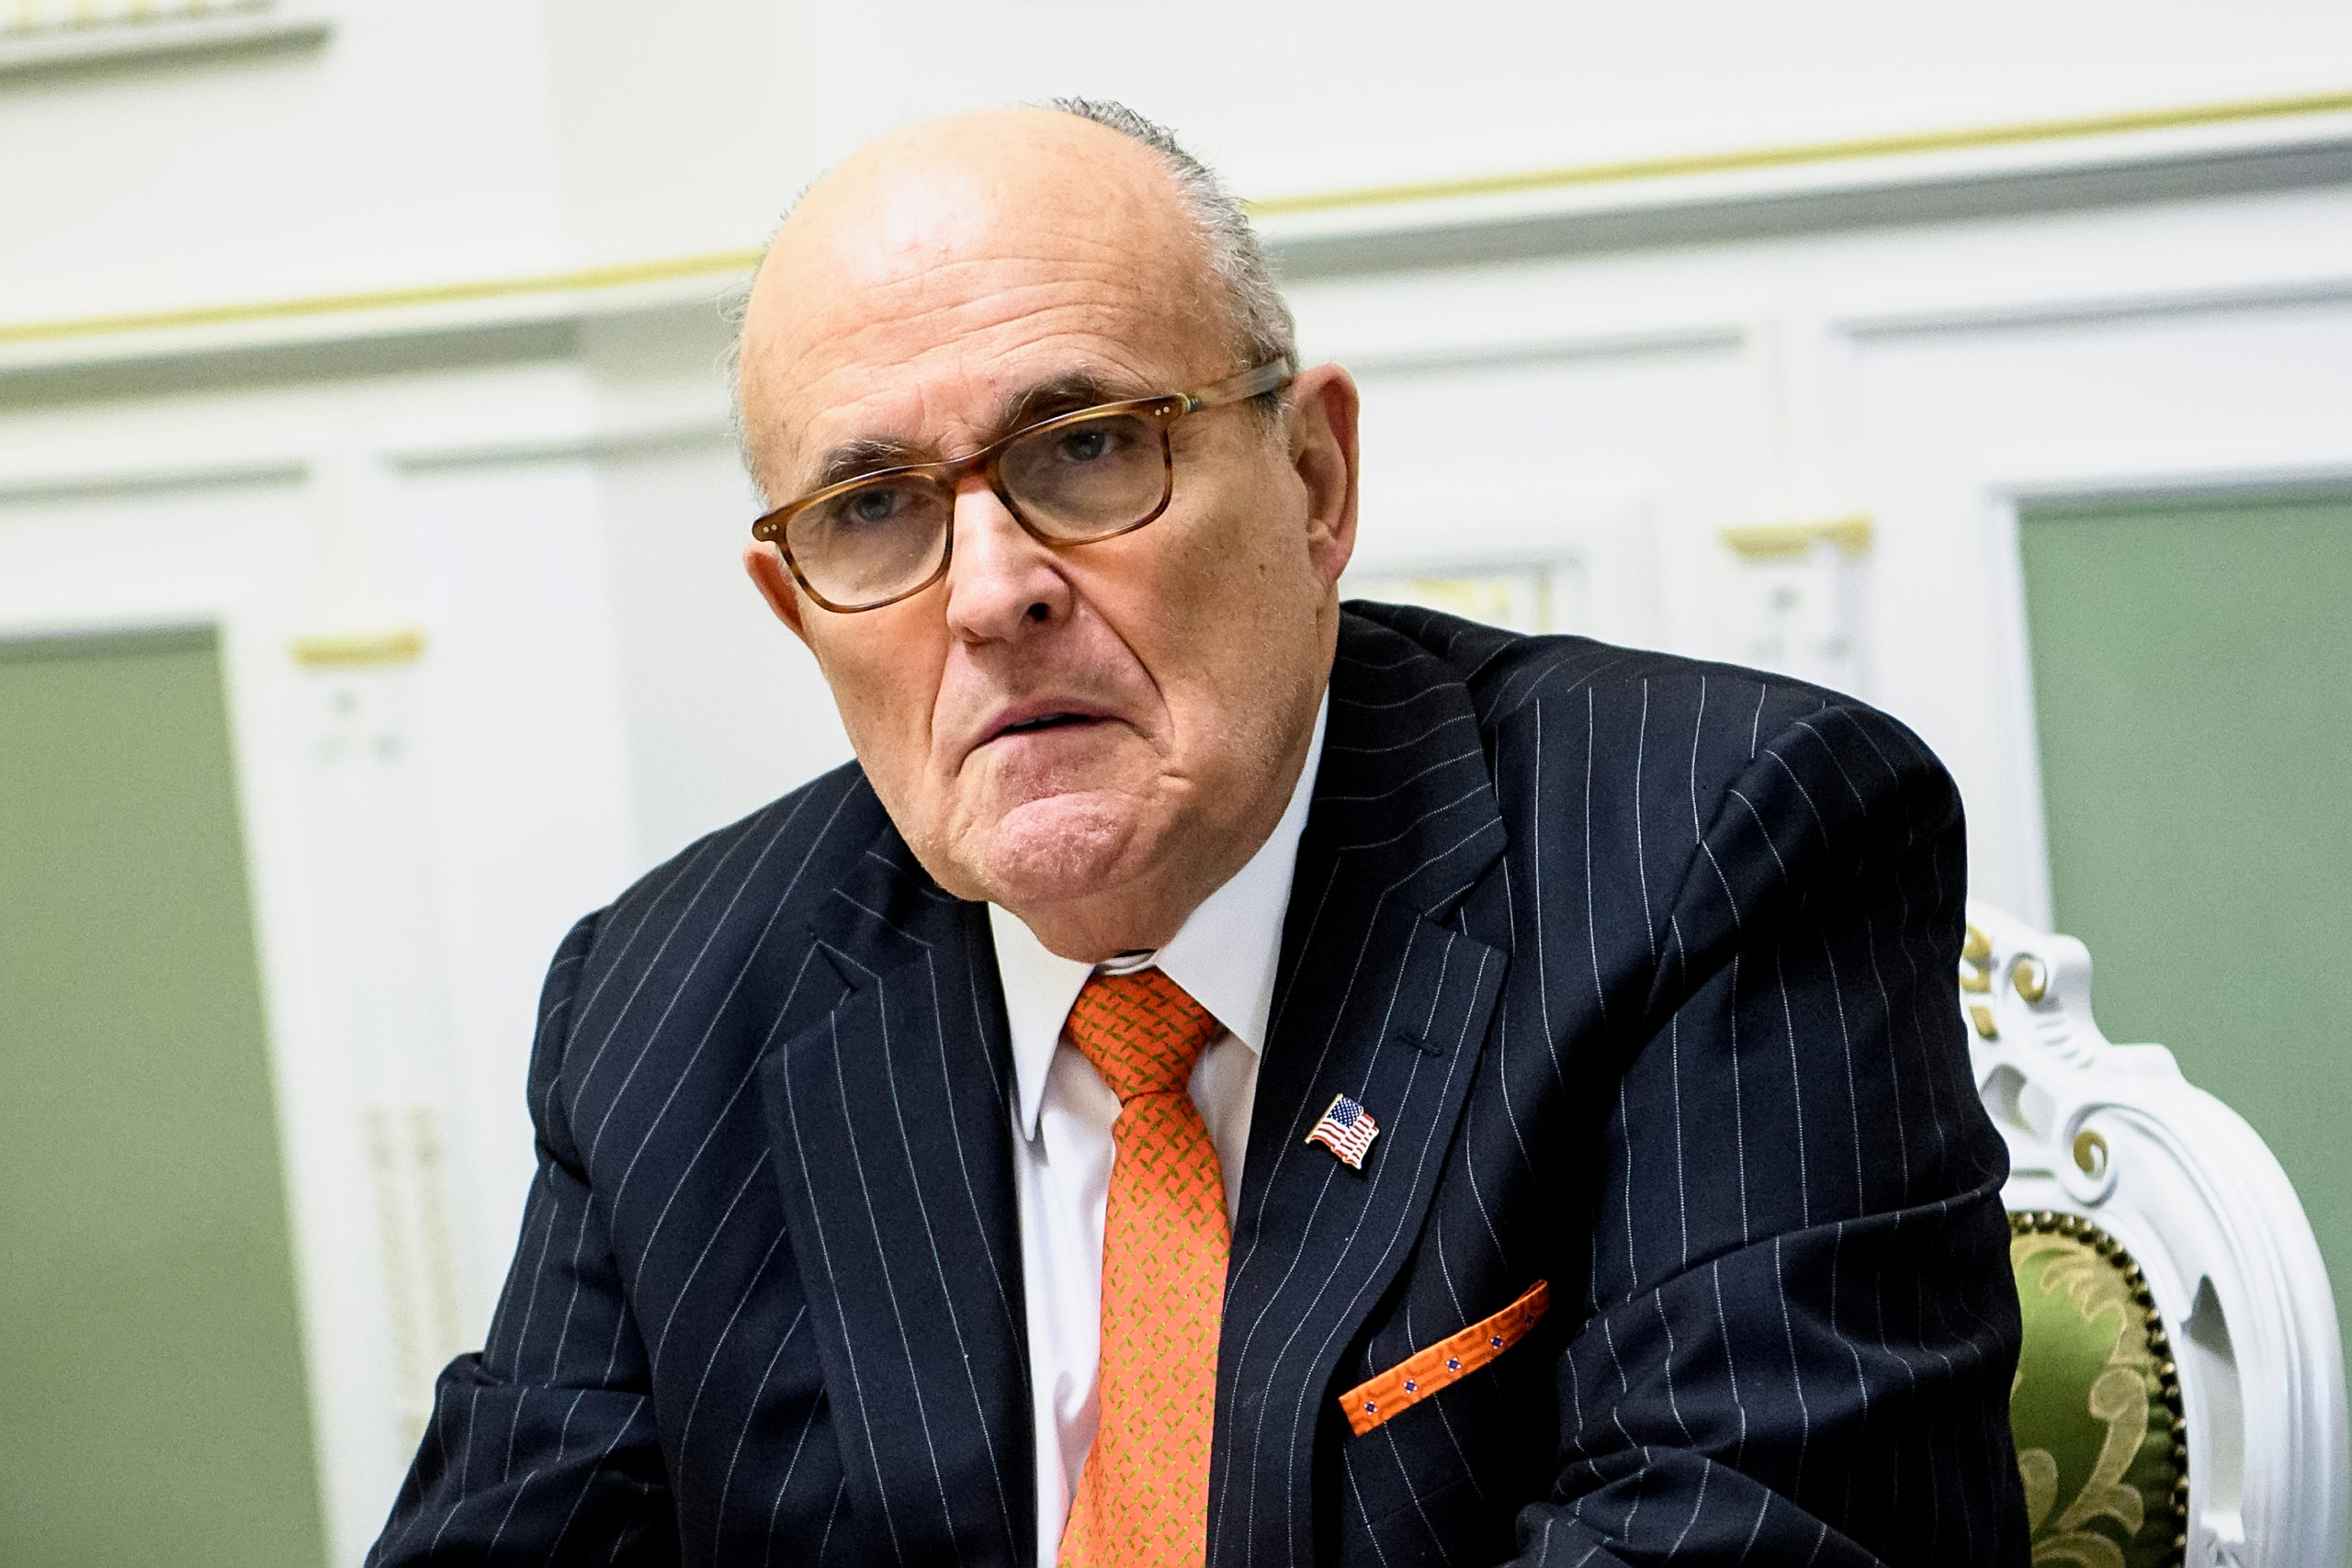 LDAD Collects 1000s of Signatures for Ethics Complaint Against Rudy Giuliani